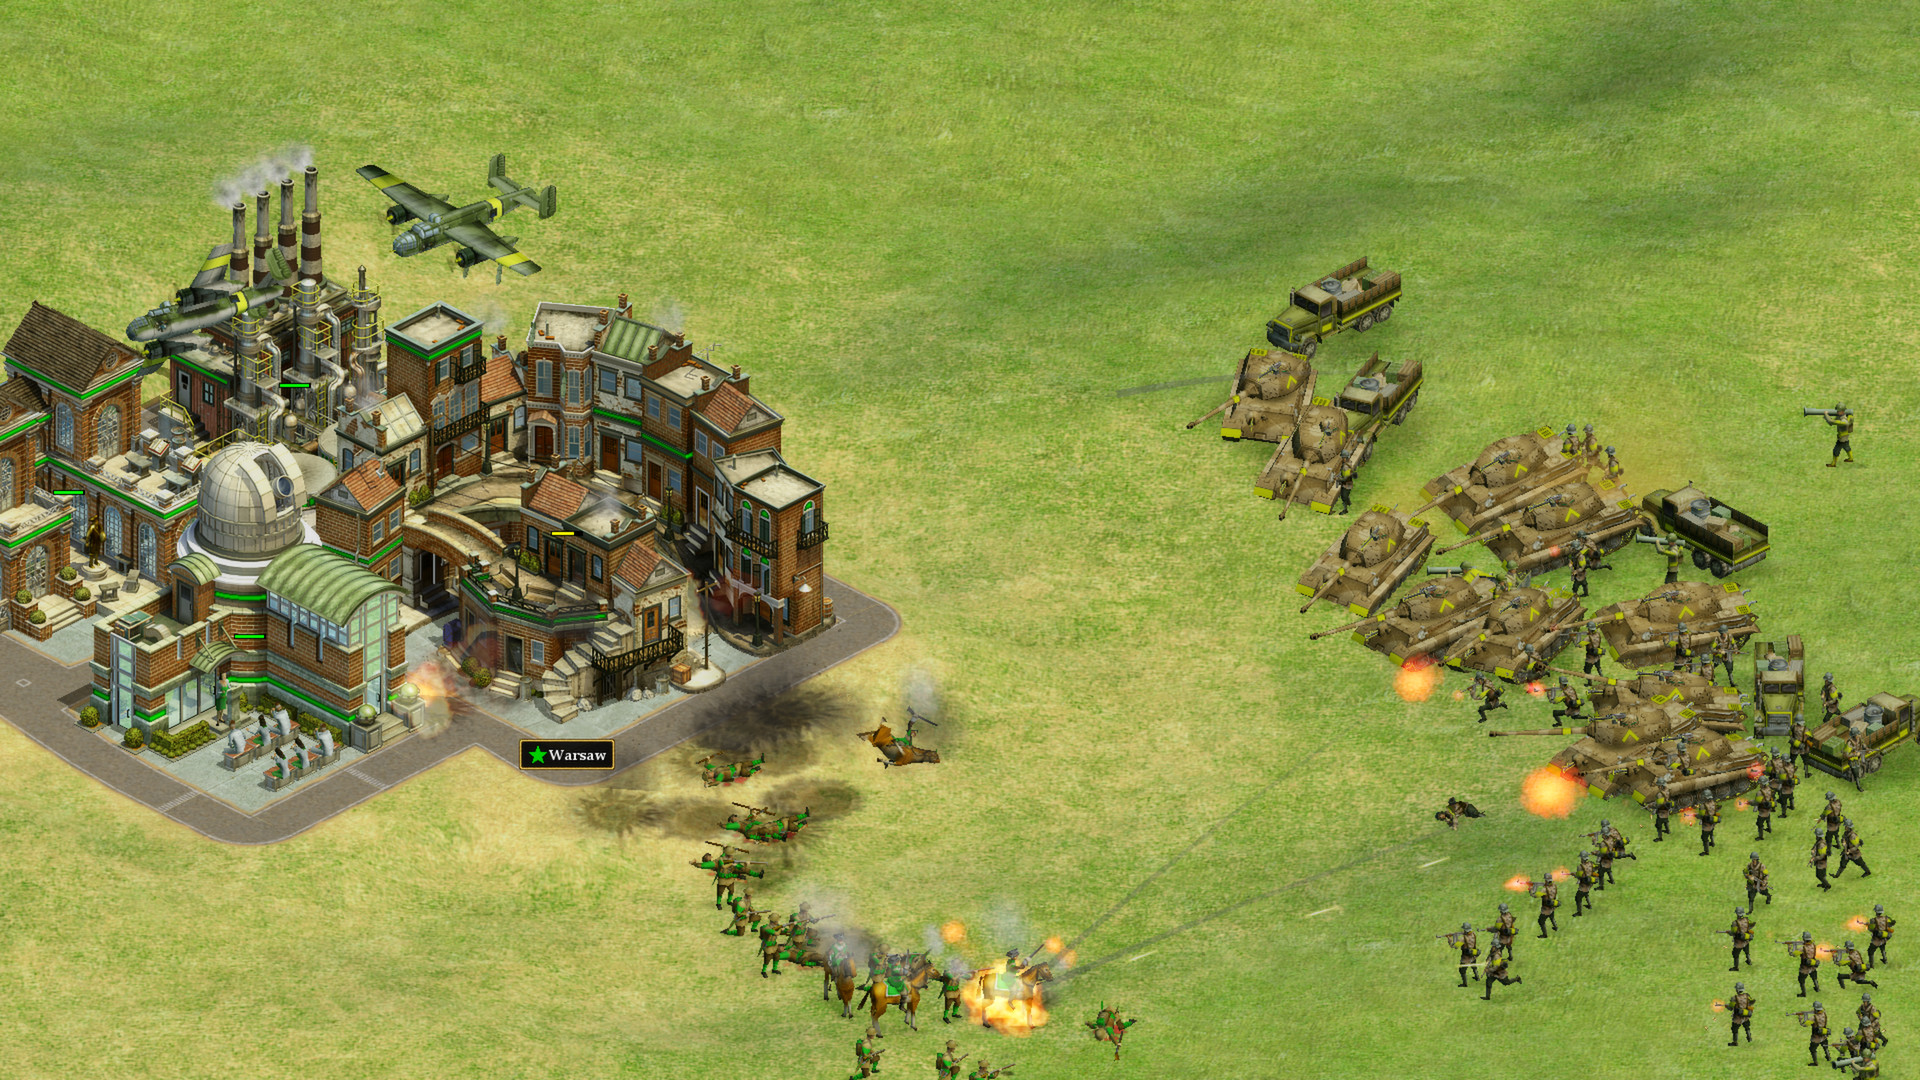 Rise of Nations: Extended Edition Steam Charts & Stats